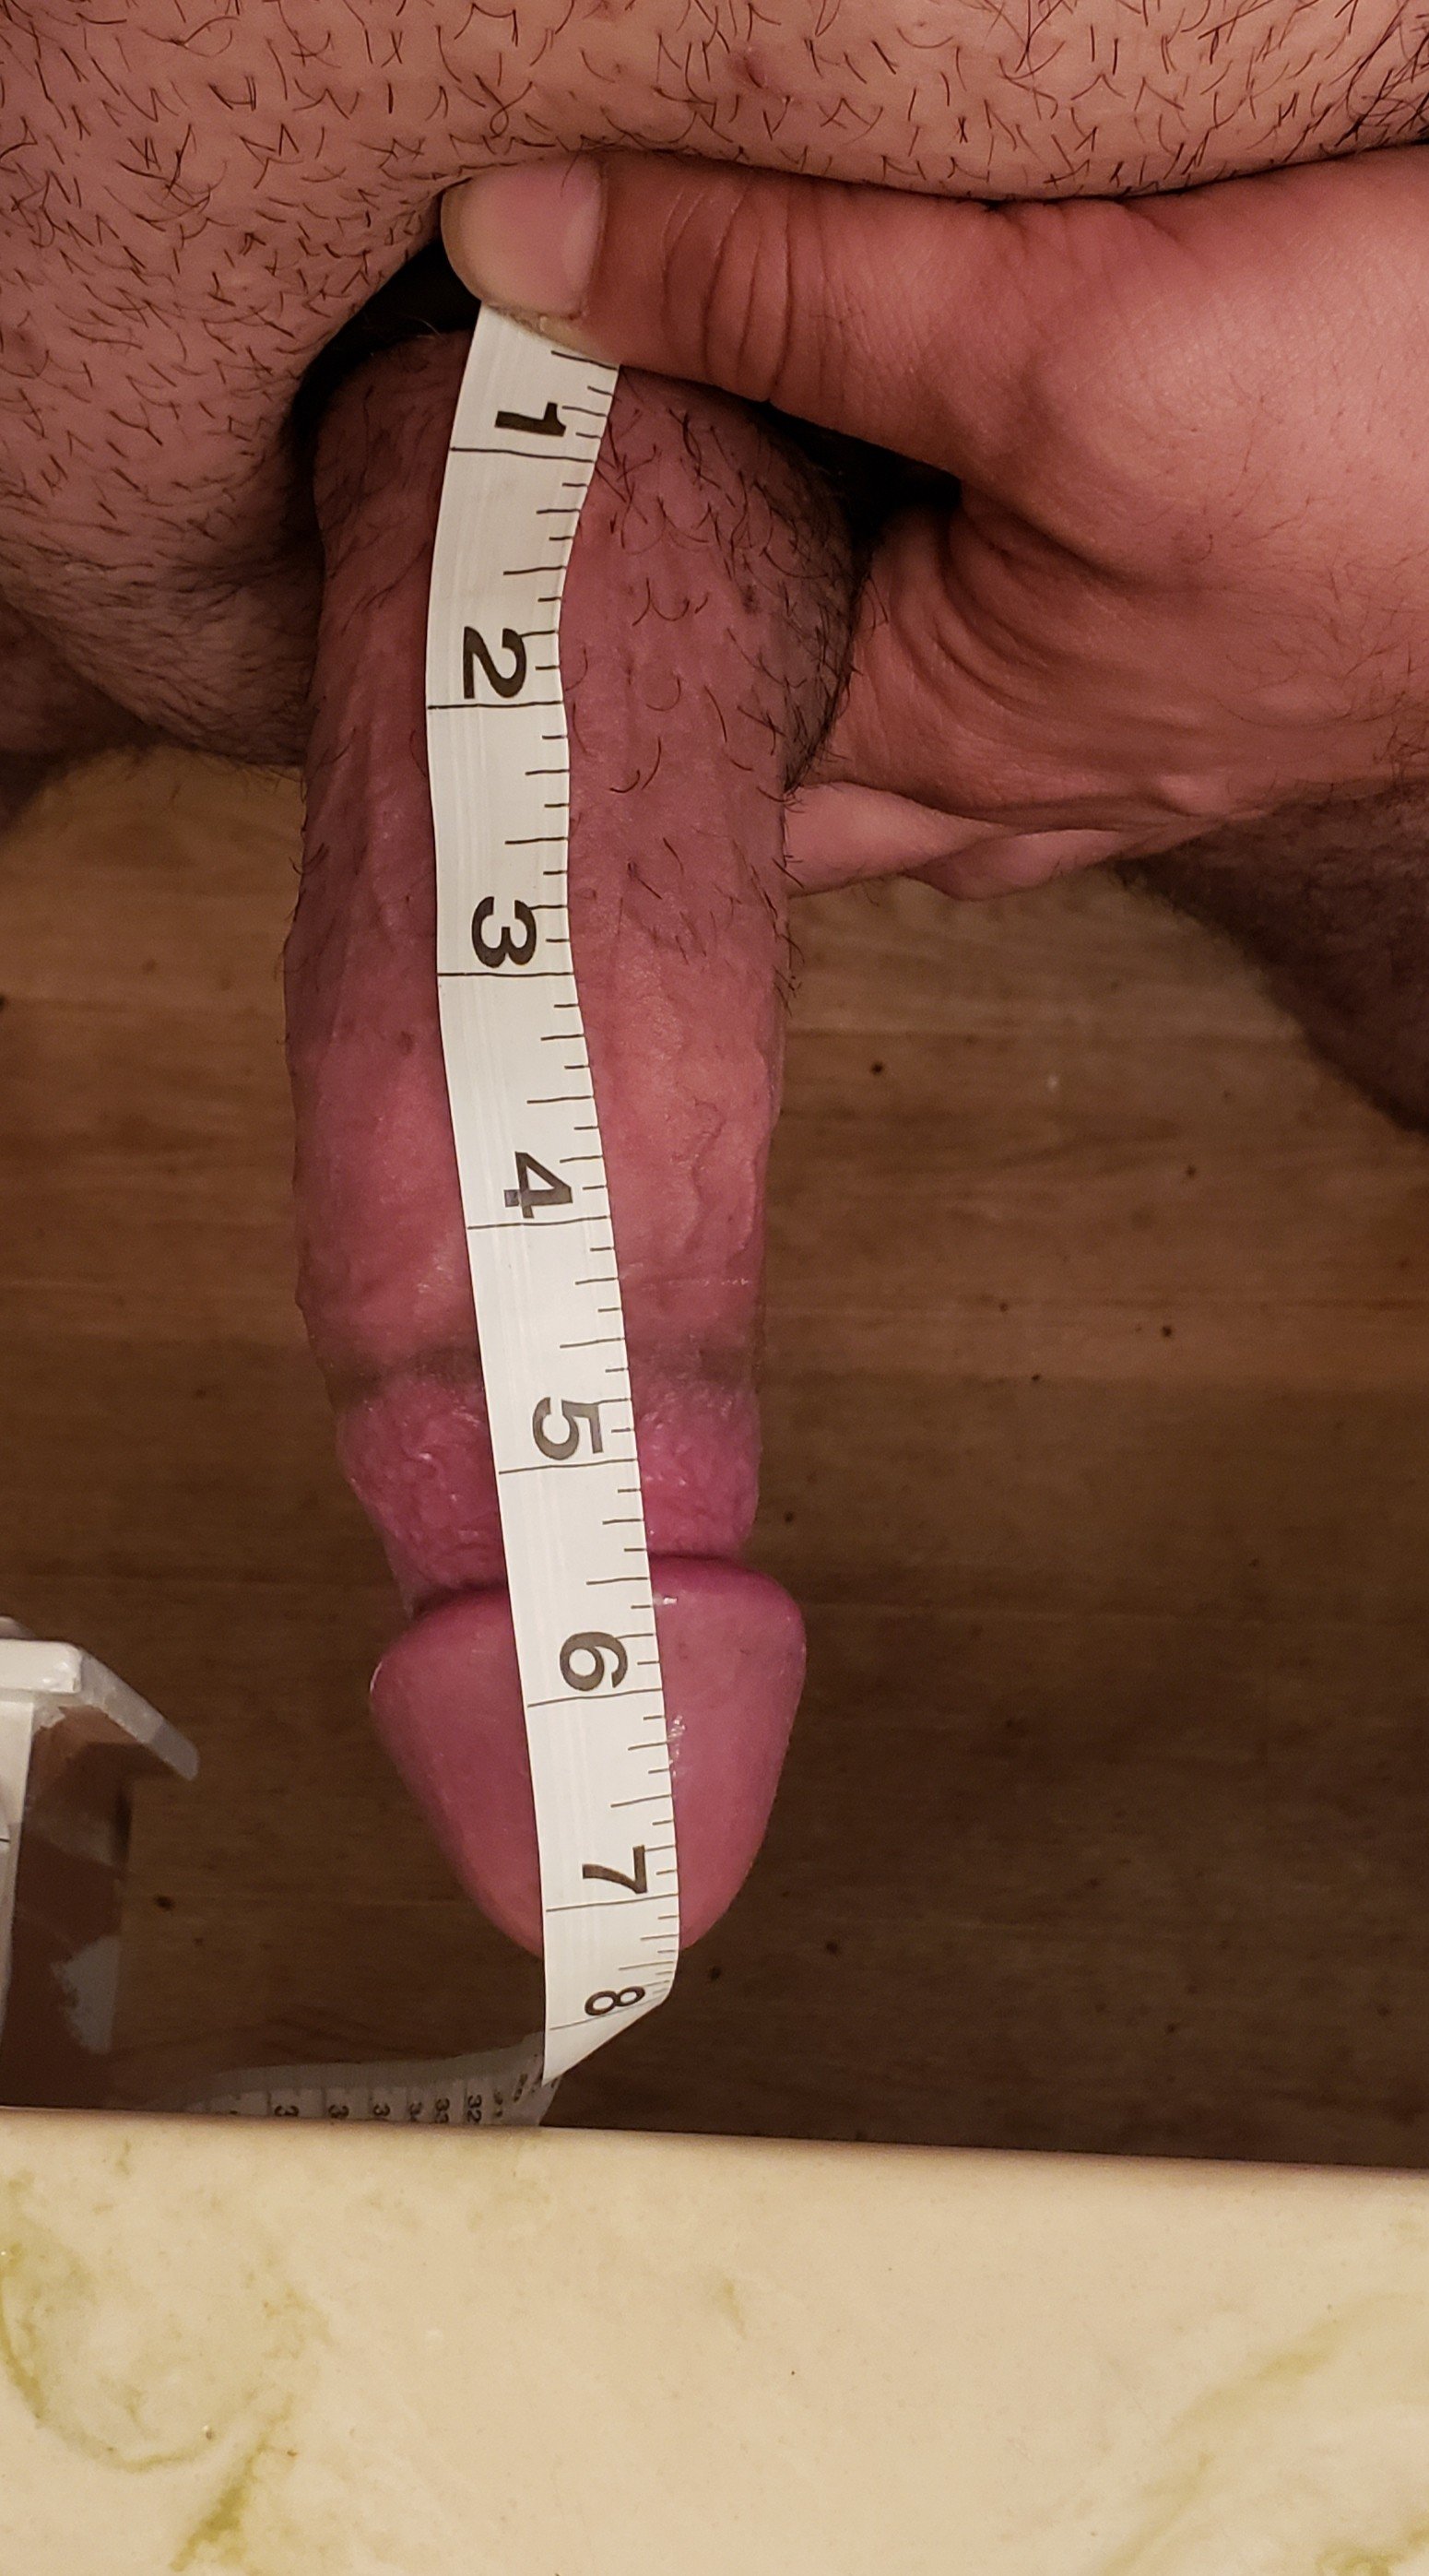 Photo by Rasz67 with the username @Rasz67,  July 16, 2019 at 11:39 PM. The post is about the topic Rate my pussy or dick and the text says '#rate #bigdick #cock #fatcock #veiny #thick'